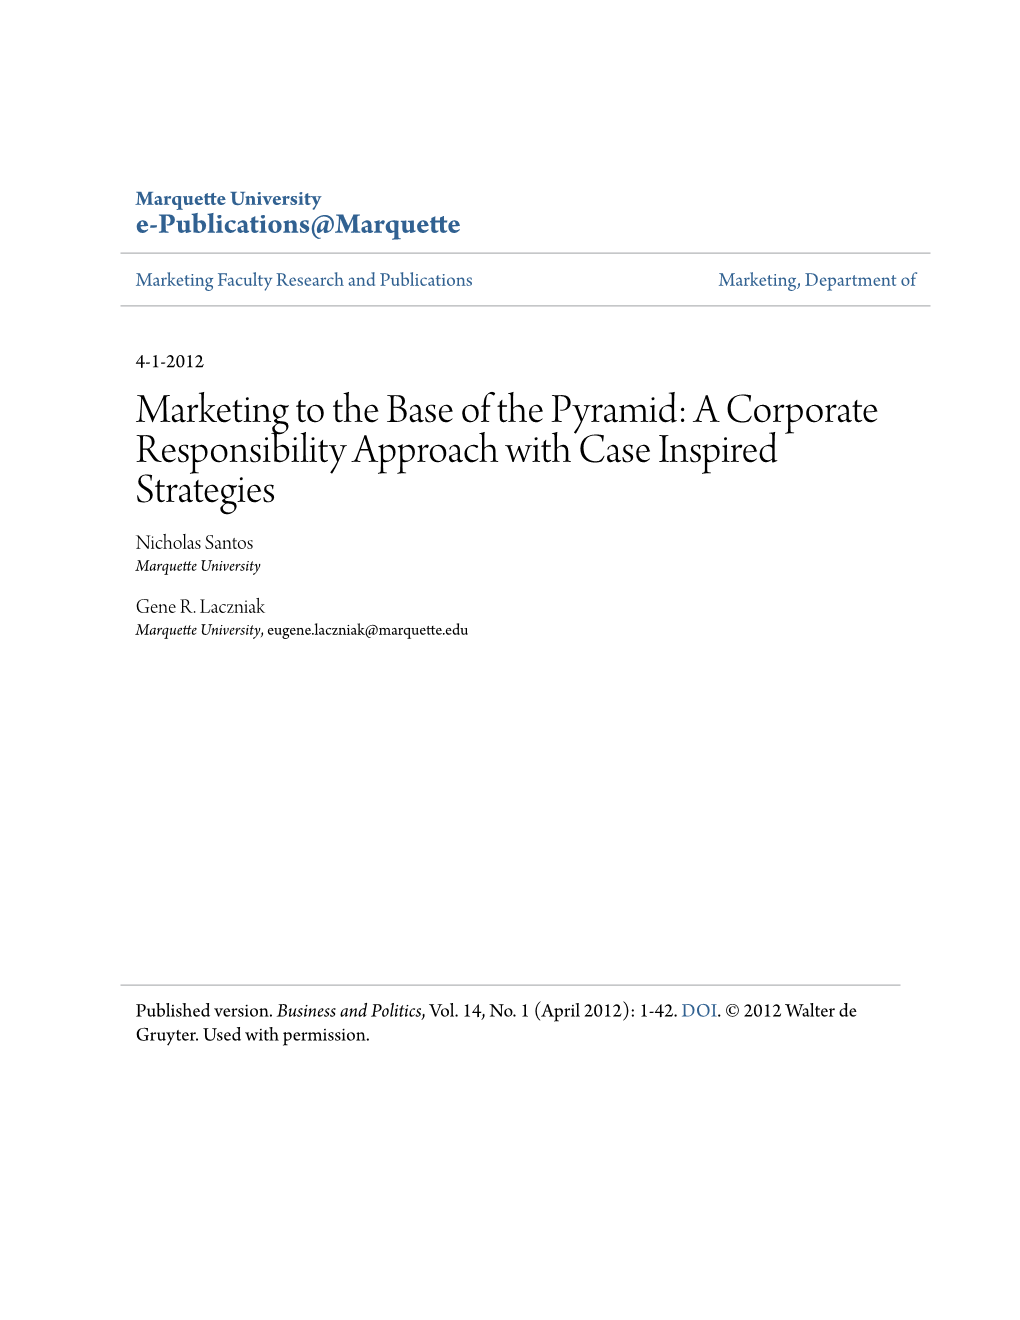 Marketing to the Base of the Pyramid: a Corporate Responsibility Approach with Case Inspired Strategies Nicholas Santos Marquette University